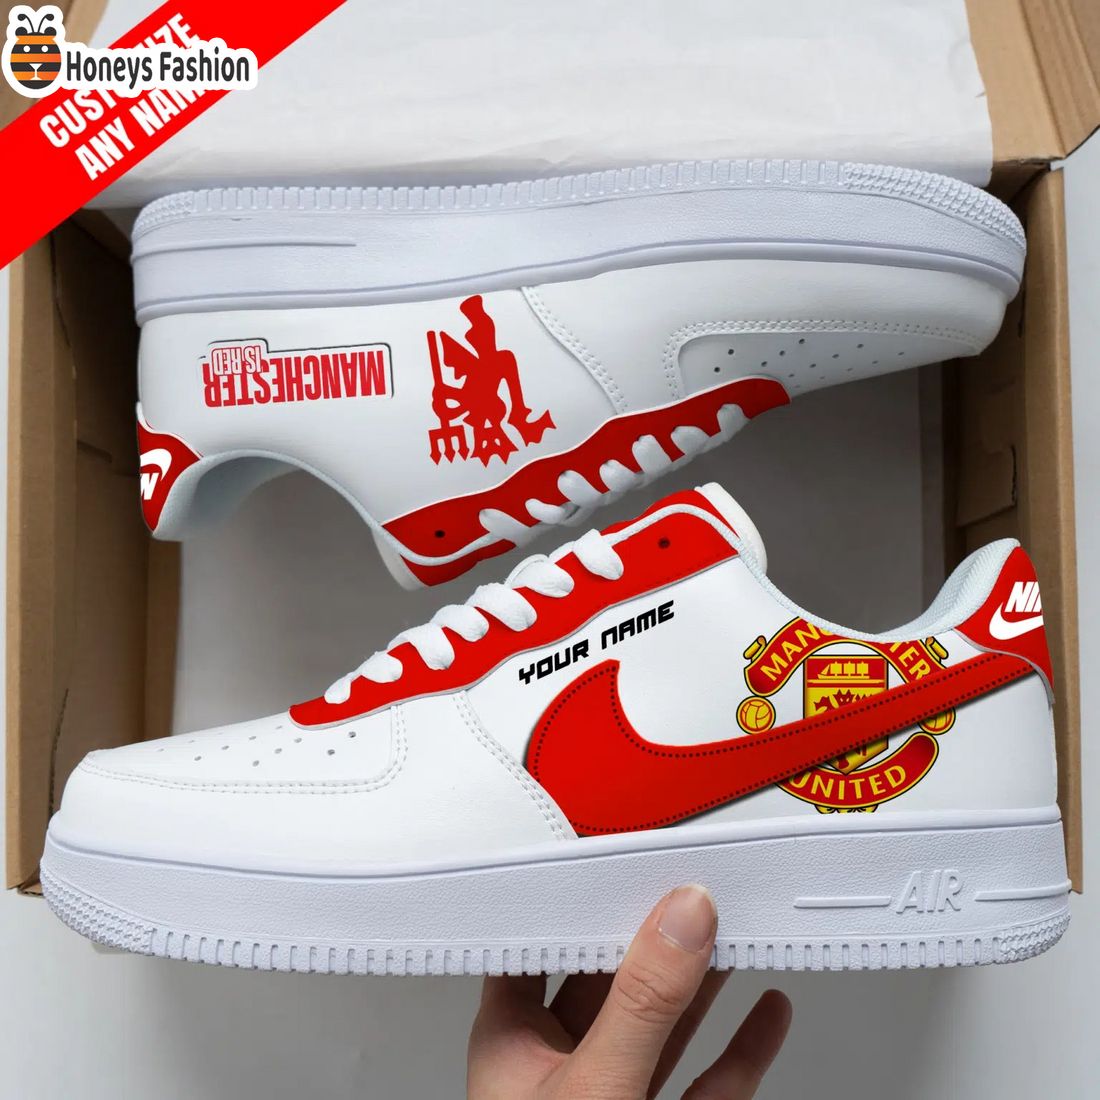 Manchester United Personalized Nike Air Force Sneakers